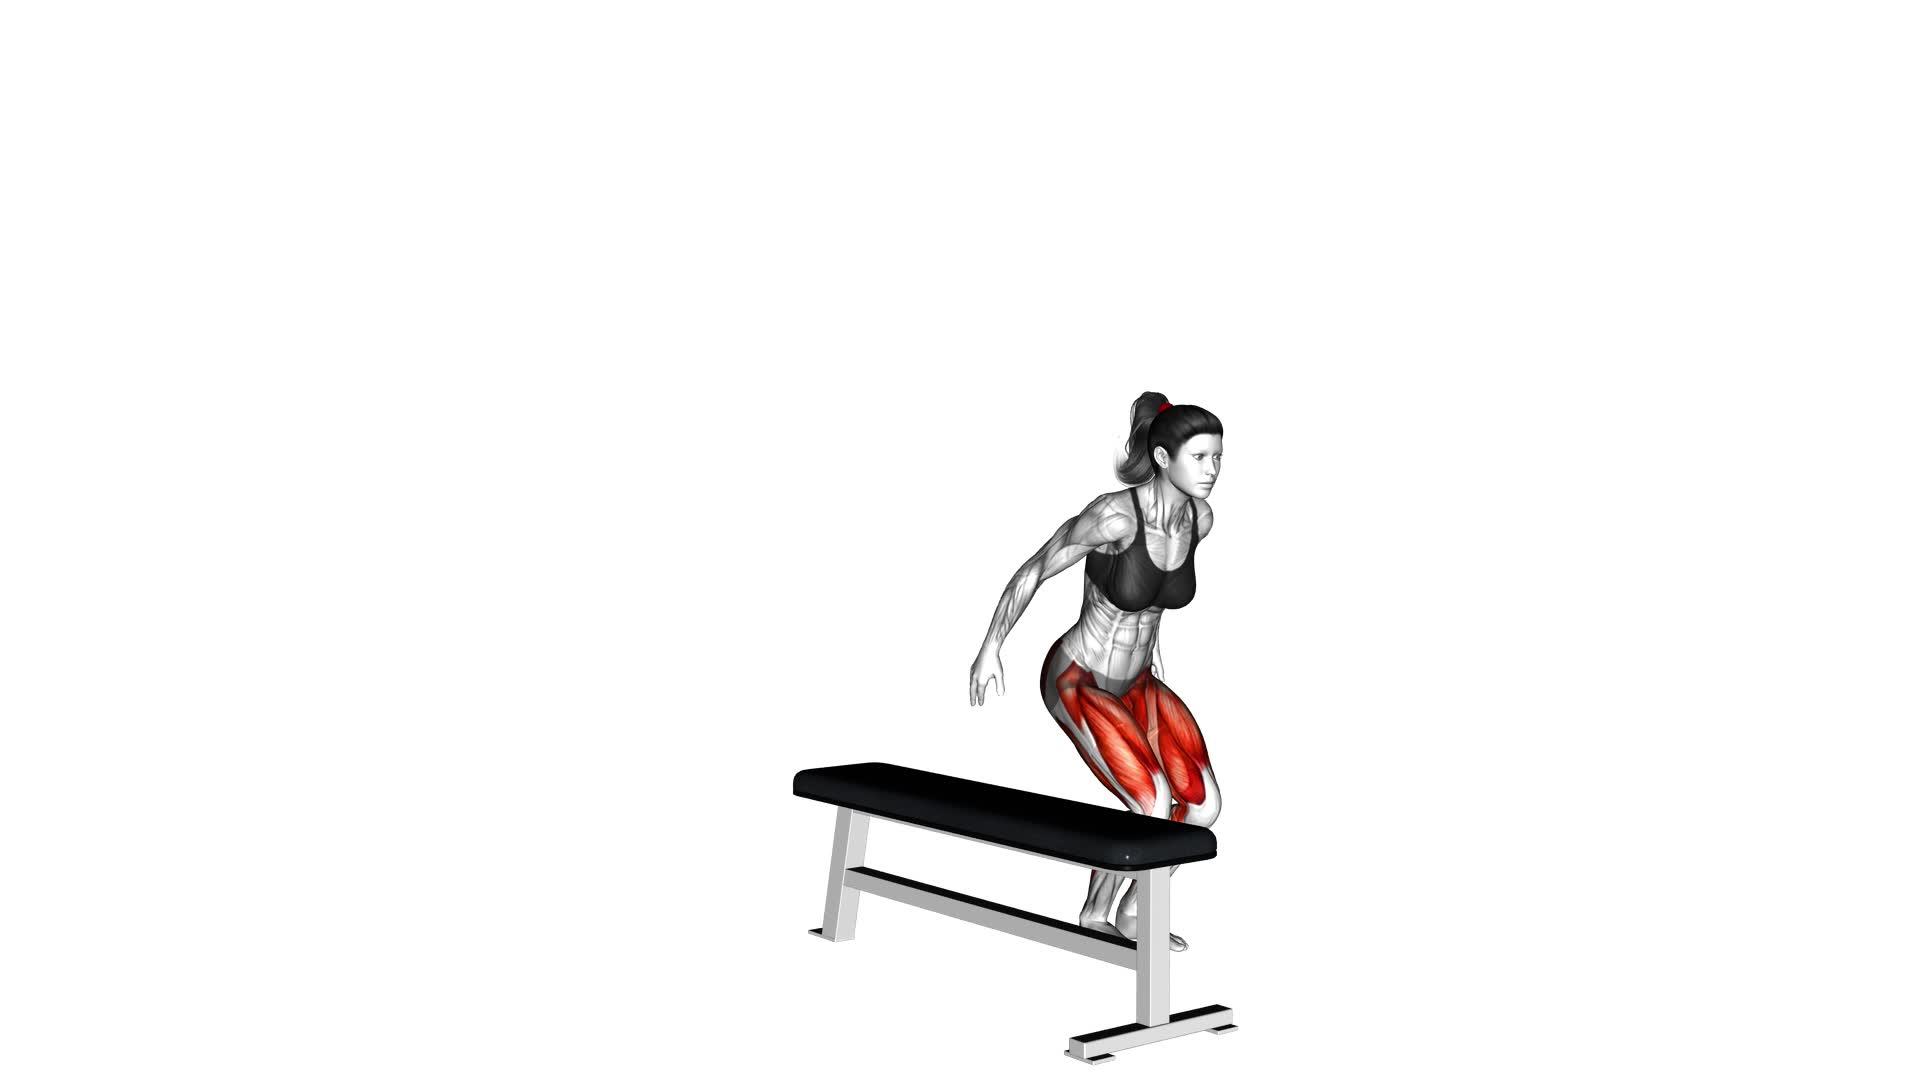 Lateral Box Jump (female) - Video Exercise Guide & Tips